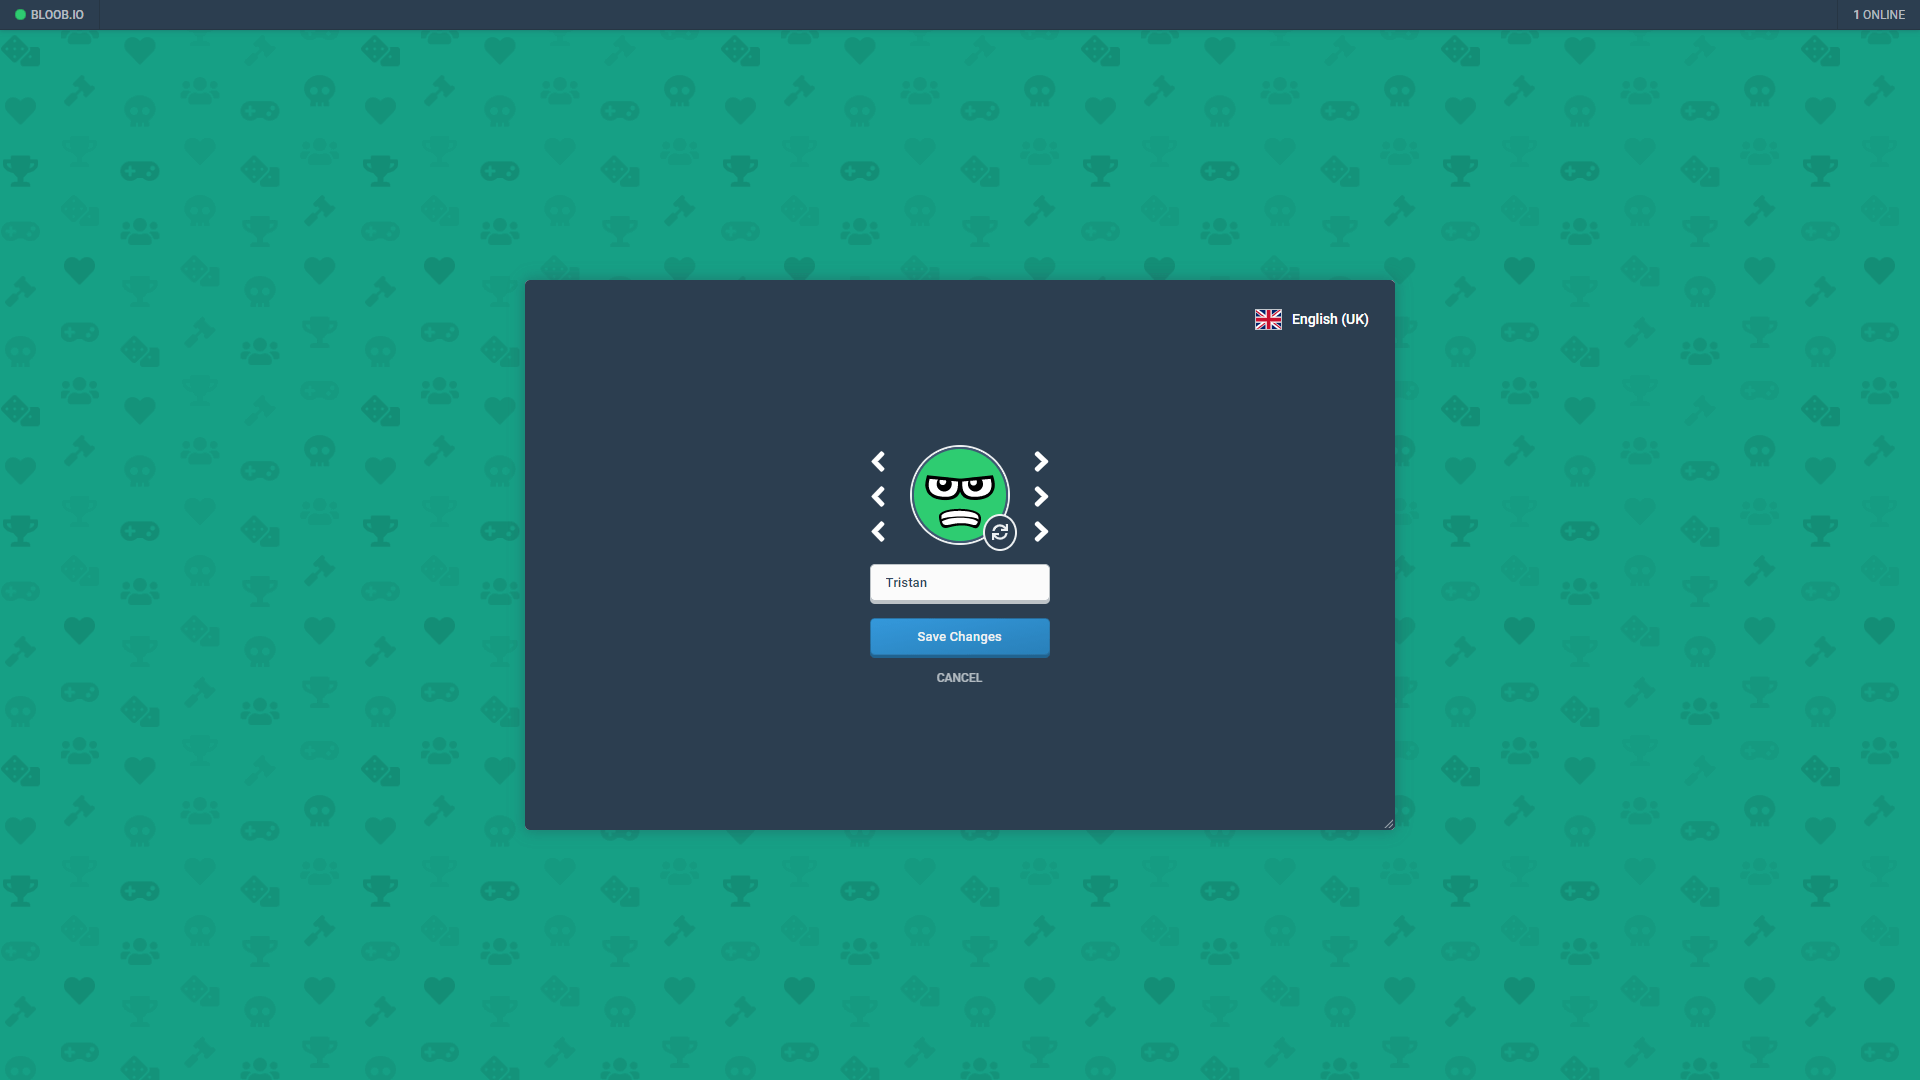 A screenshot showing the character customisation screen on Bloob.io. This also includes locale options.